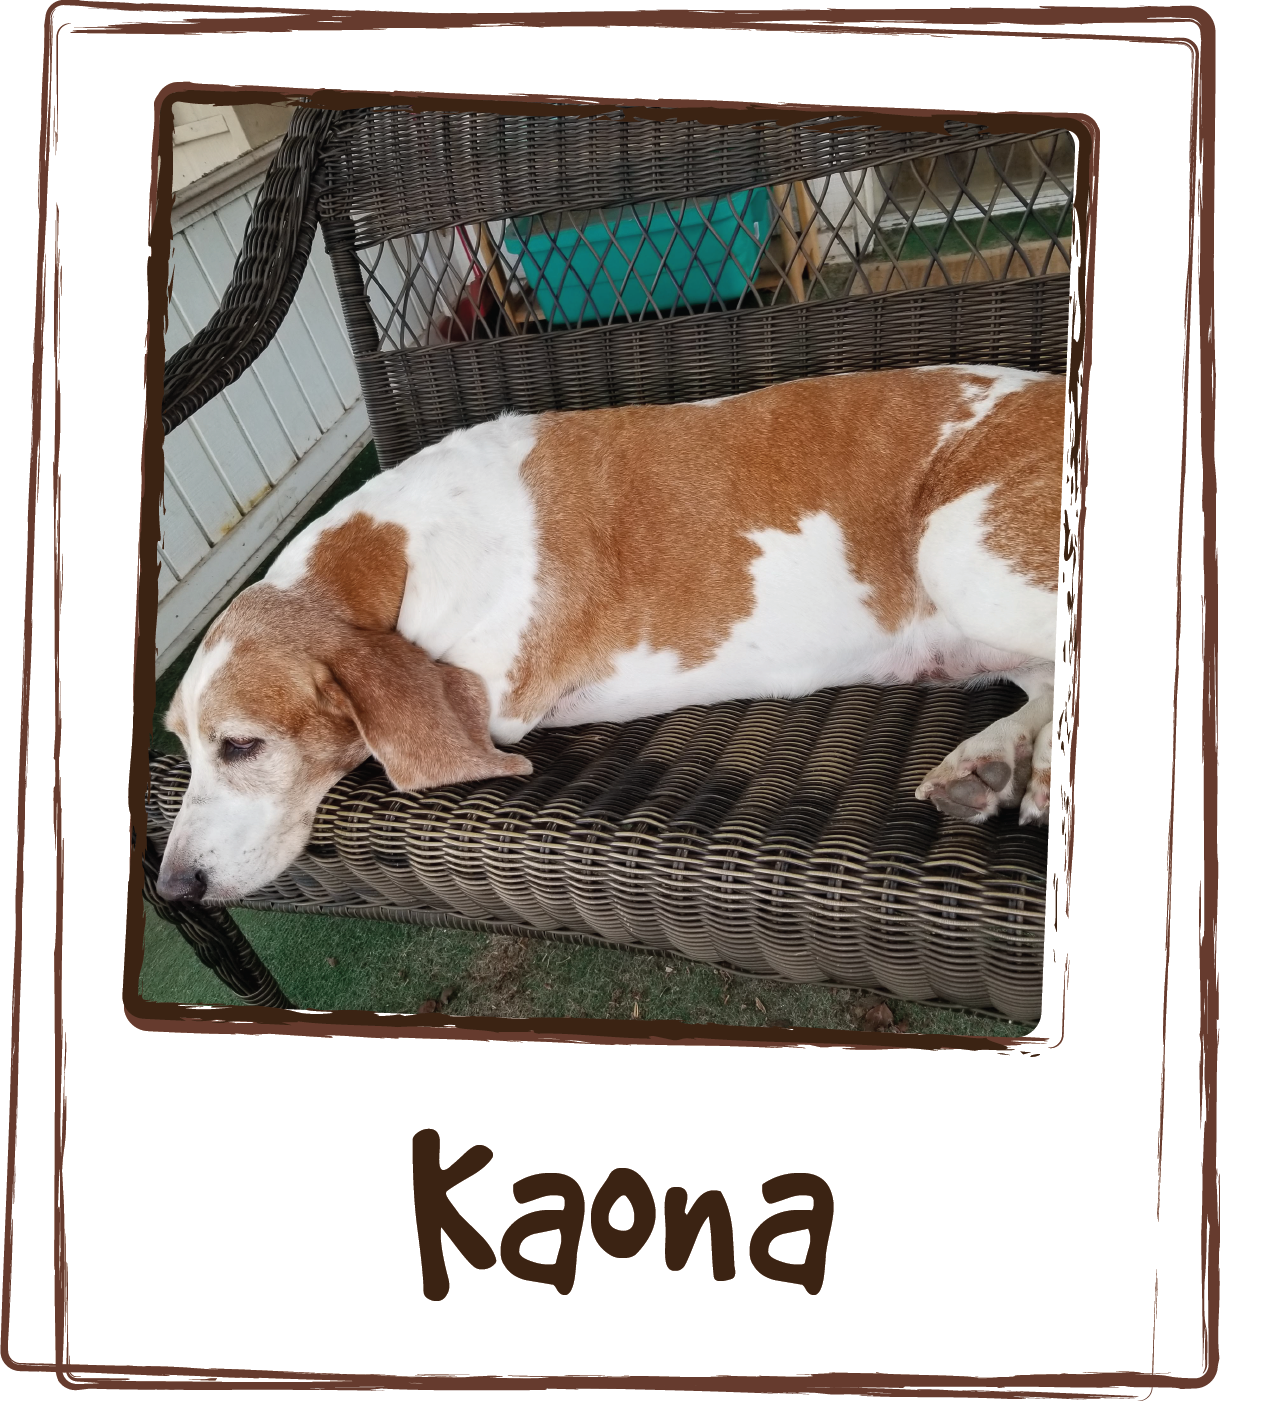  “Kaona (AKA Wild Puppy) is a Basset with the energy of a Lab. She get's homemade meals and hasn't met a vegetable or vitamin she can't spit out even if it's wrapped in a Porterhouse. It's always been a struggle to get her take any kind of vitamin, w